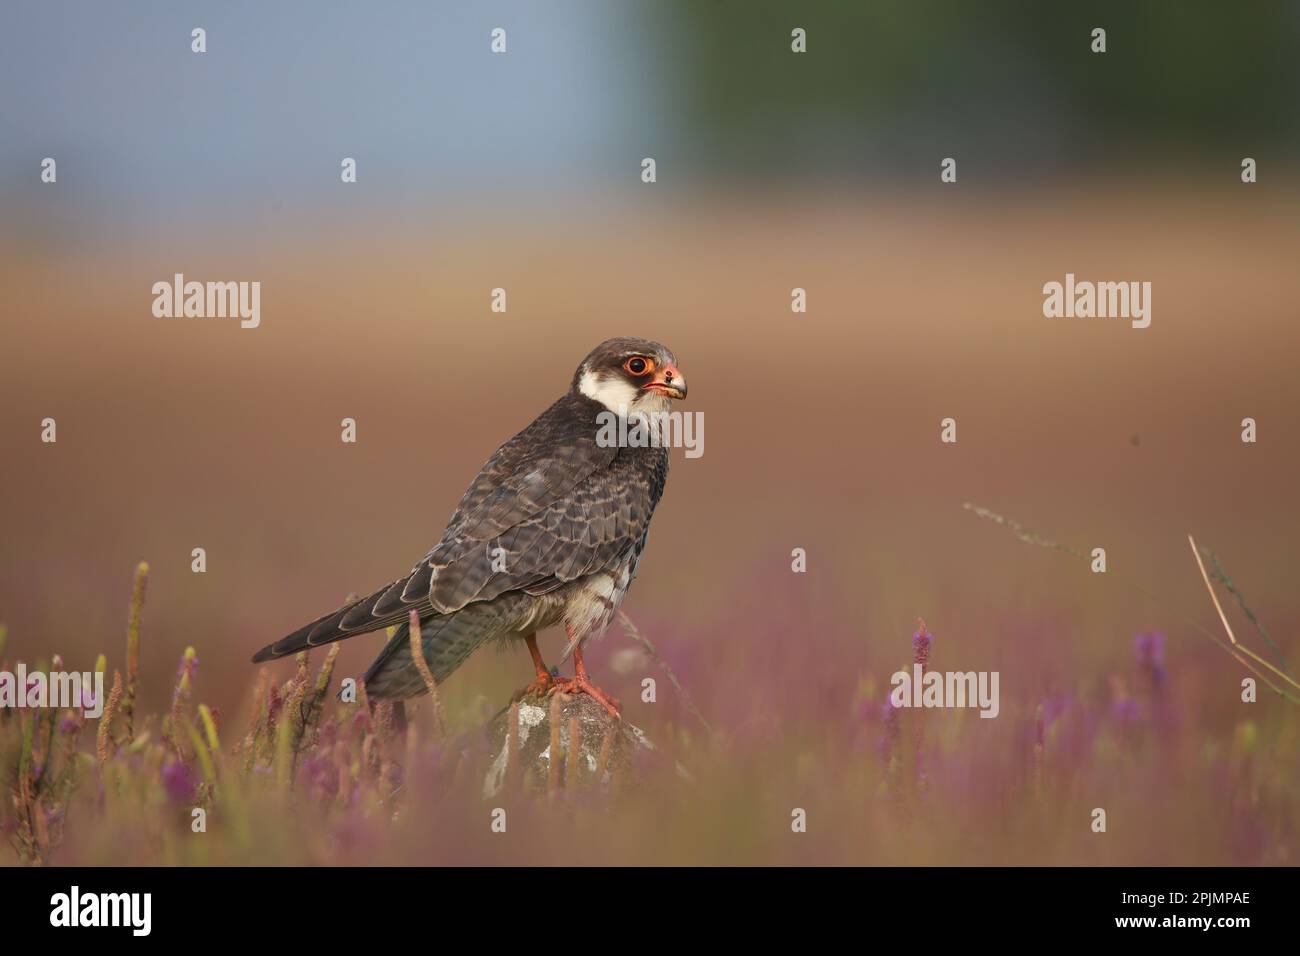 Amur falcon (Falco amurensis). It breeds in south-eastern Siberia and Northern China before migrating in large flocks across India and over the Arabia Stock Photo